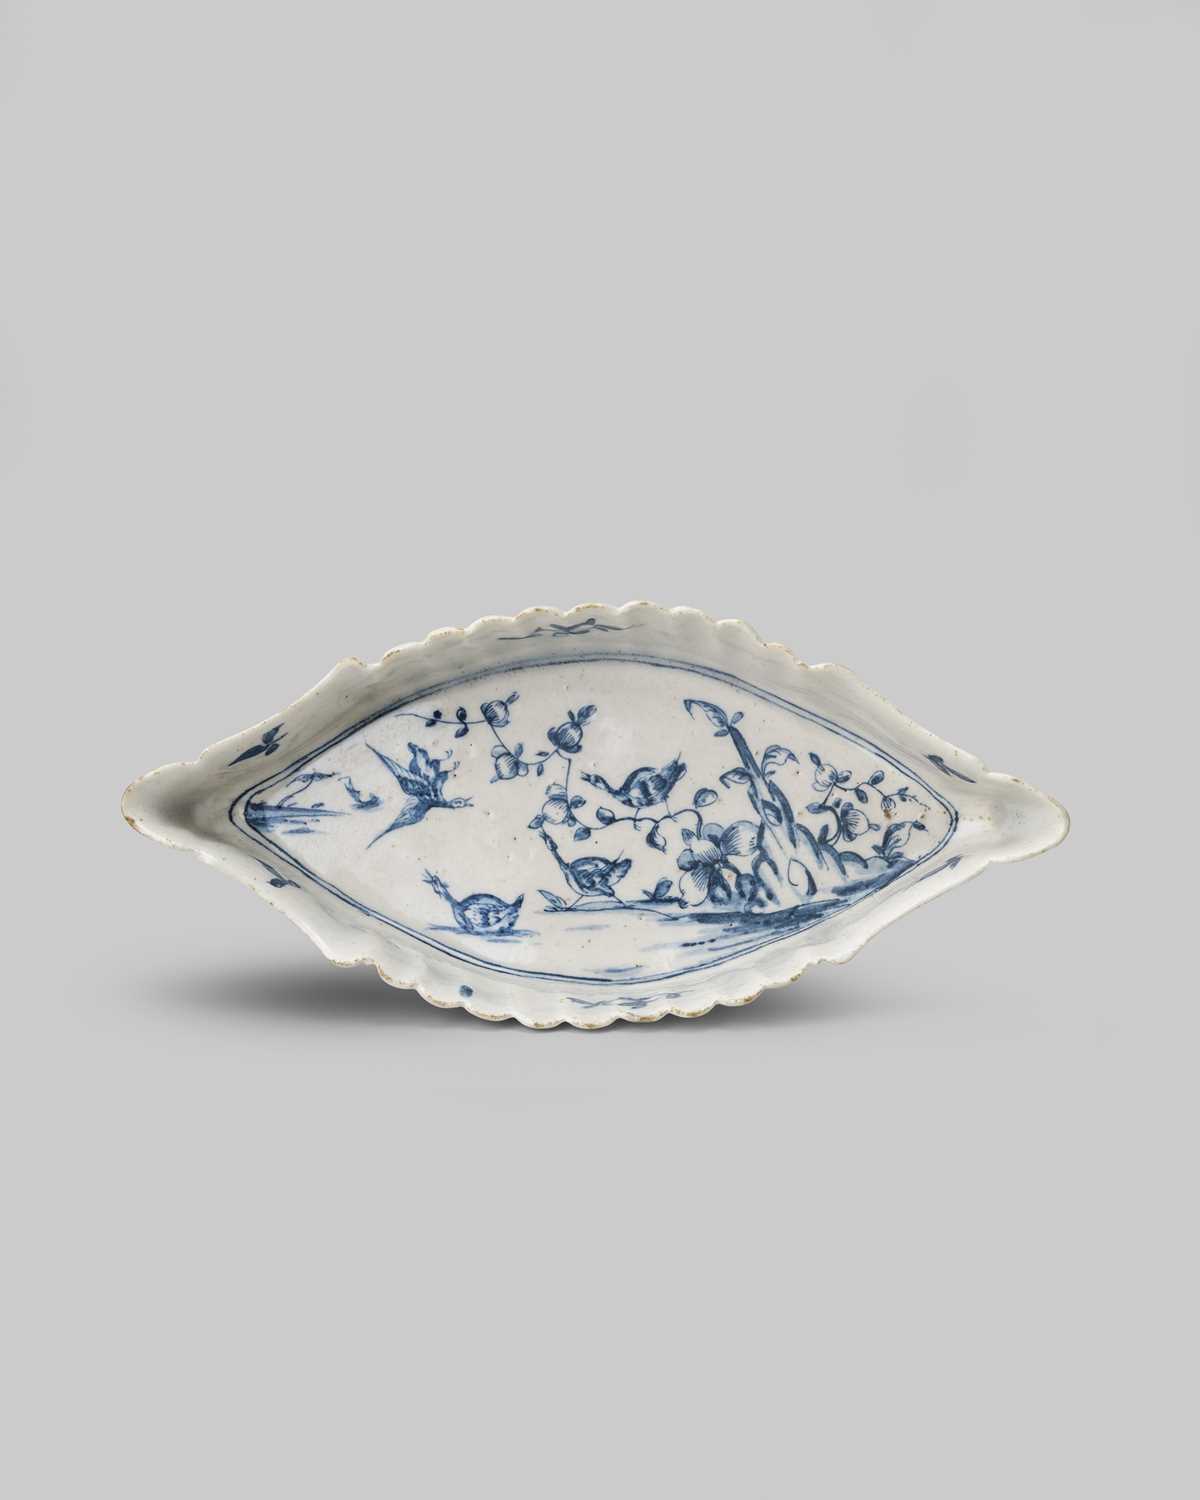 A rare and important blue and white Lowestoft spoon tray, c.1757-60, of a deep elongated shape